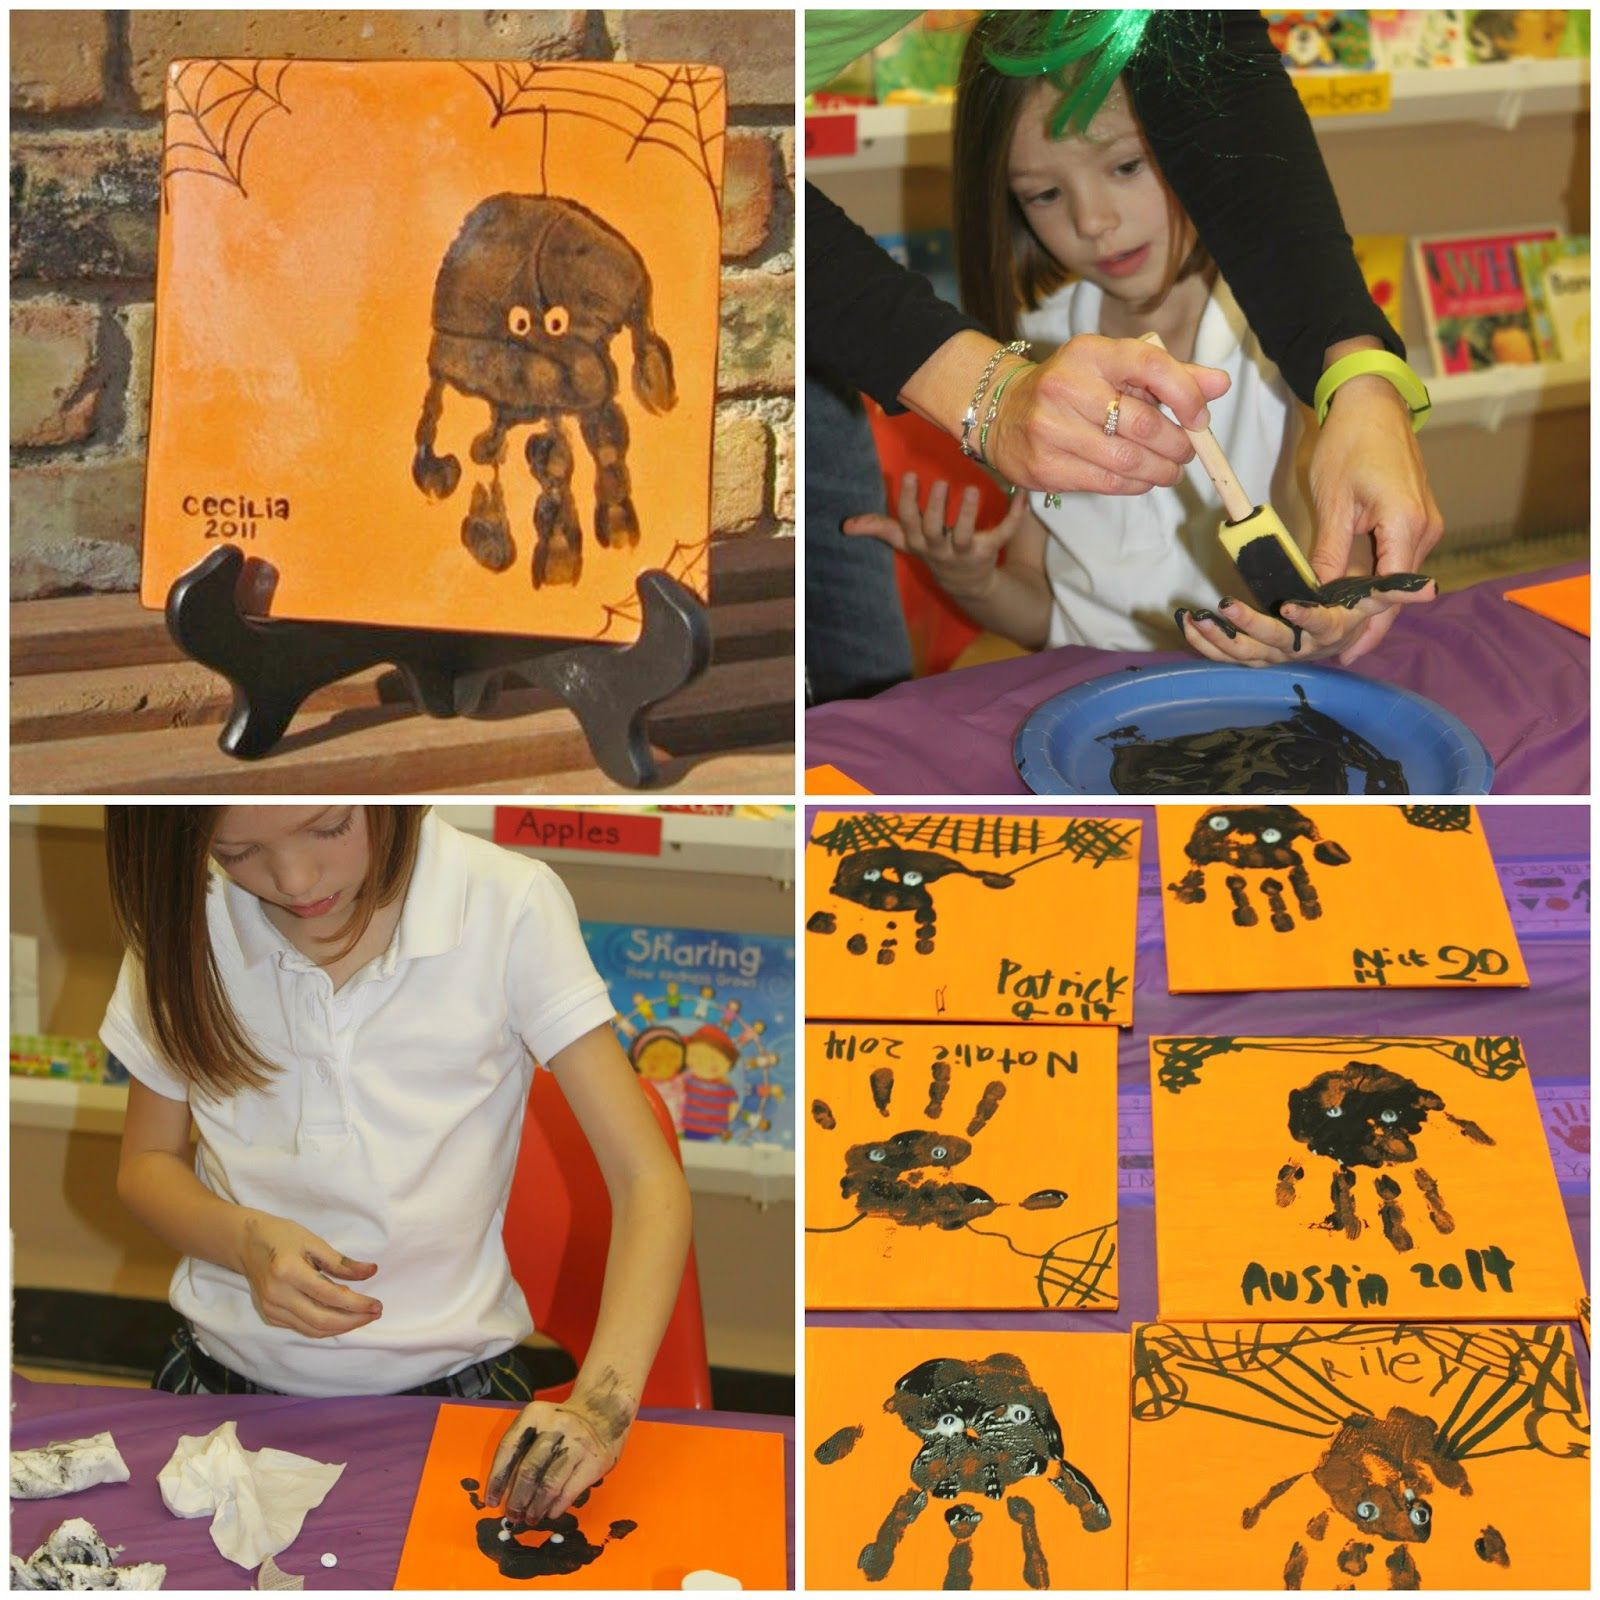 2Nd Grade Halloween Party Ideas
 Keeping up with the Kiddos 1st Grade Halloween Party